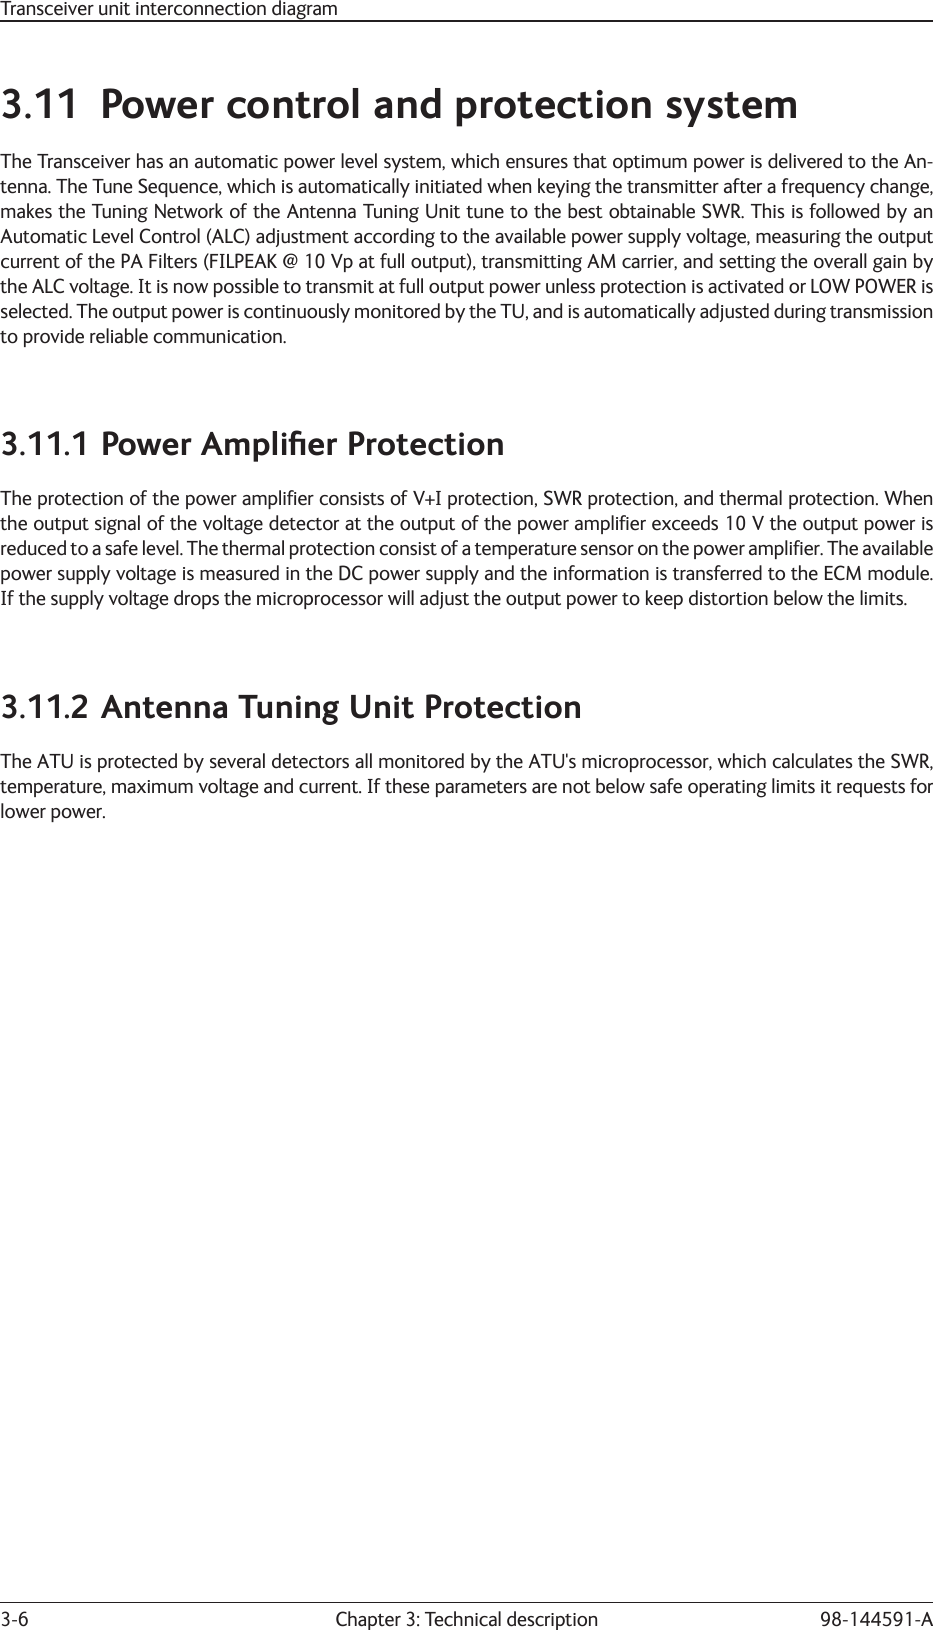 Chapter 3: Technical description3-6 98-144591-A3.11  Power control and protection systemThe Transceiver has an automatic power level system, which ensures that optimum power is delivered to the An-tenna. The Tune Sequence, which is automatically initiated when keying the transmitter after a frequency change, makes the Tuning Network of the Antenna Tuning Unit tune to the best obtainable SWR. This is followed by an Automatic Level Control (ALC) adjustment according to the available power supply voltage, measuring the output current of the PA Filters (FILPEAK @ 10 Vp at full output), transmitting AM carrier, and setting the overall gain by the ALC voltage. It is now possible to transmit at full output power unless protection is activated or LOW POWER is selected. The output power is continuously monitored by the TU, and is automatically adjusted during transmission to provide reliable communication.3.11.1 Power Ampliﬁ er ProtectionThe protection of the power ampliﬁ er consists of V+I protection, SWR protection, and thermal protection. When the output signal of the voltage detector at the output of the power ampliﬁ er exceeds 10 V the output power is reduced to a safe level. The thermal protection consist of a temperature sensor on the power ampliﬁ er. The available power supply voltage is measured in the DC power supply and the information is transferred to the ECM module. If the supply voltage drops the microprocessor will adjust the output power to keep distortion below the limits.3.11.2 Antenna Tuning Unit ProtectionThe ATU is protected by several detectors all monitored by the ATU&apos;s microprocessor, which calculates the SWR, temperature, maximum voltage and current. If these parameters are not below safe operating limits it requests for lower power.Transceiver unit interconnection diagram